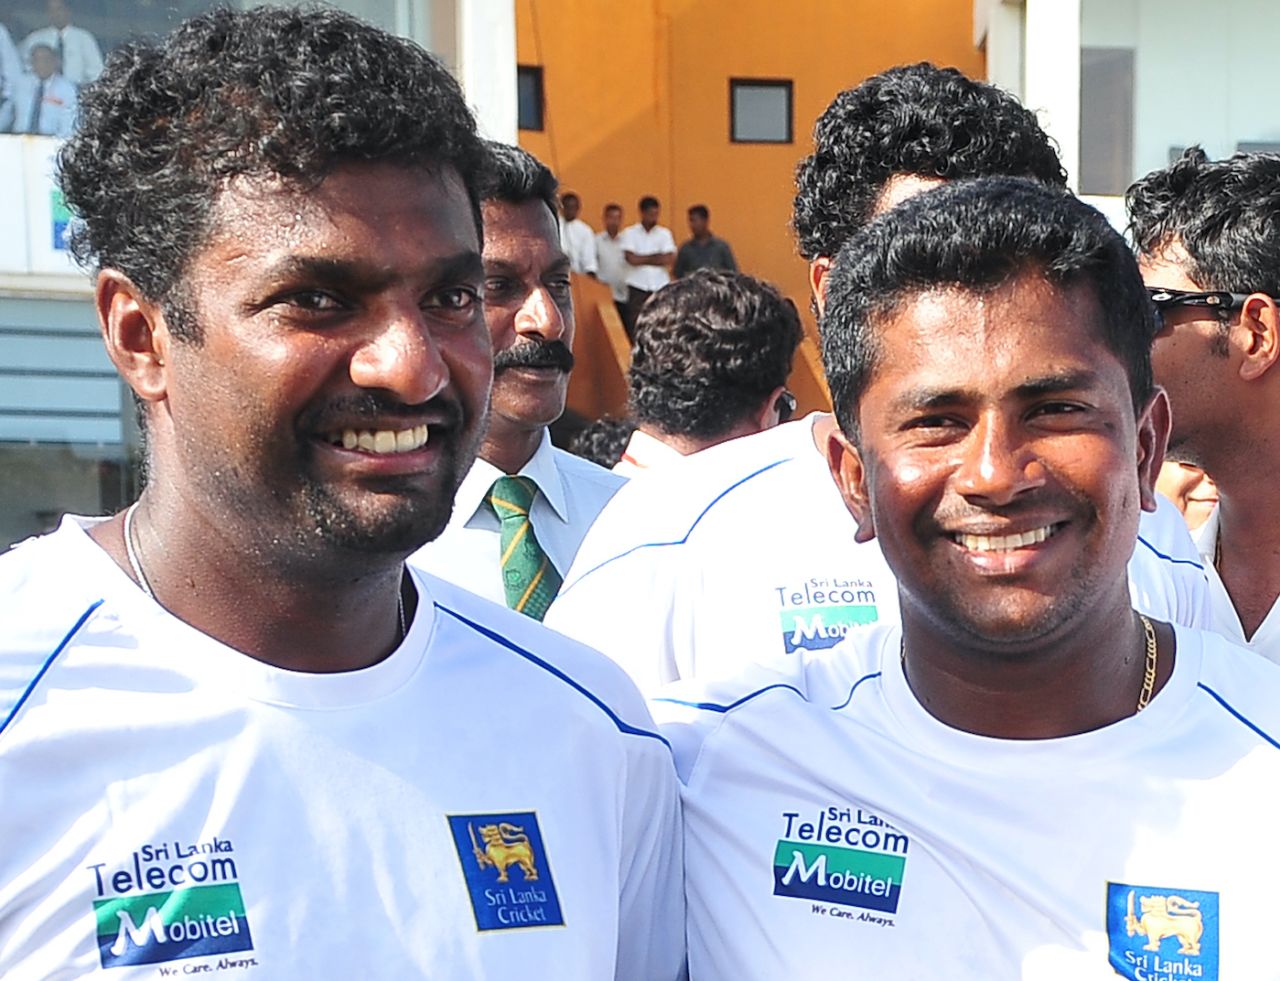 Muttiah Muralitharan poses for a photo with Rangana Herath after getting his 800th wicket, Sri Lanka vs India, 1st Test, Galle, 5th day, July 22, 2010